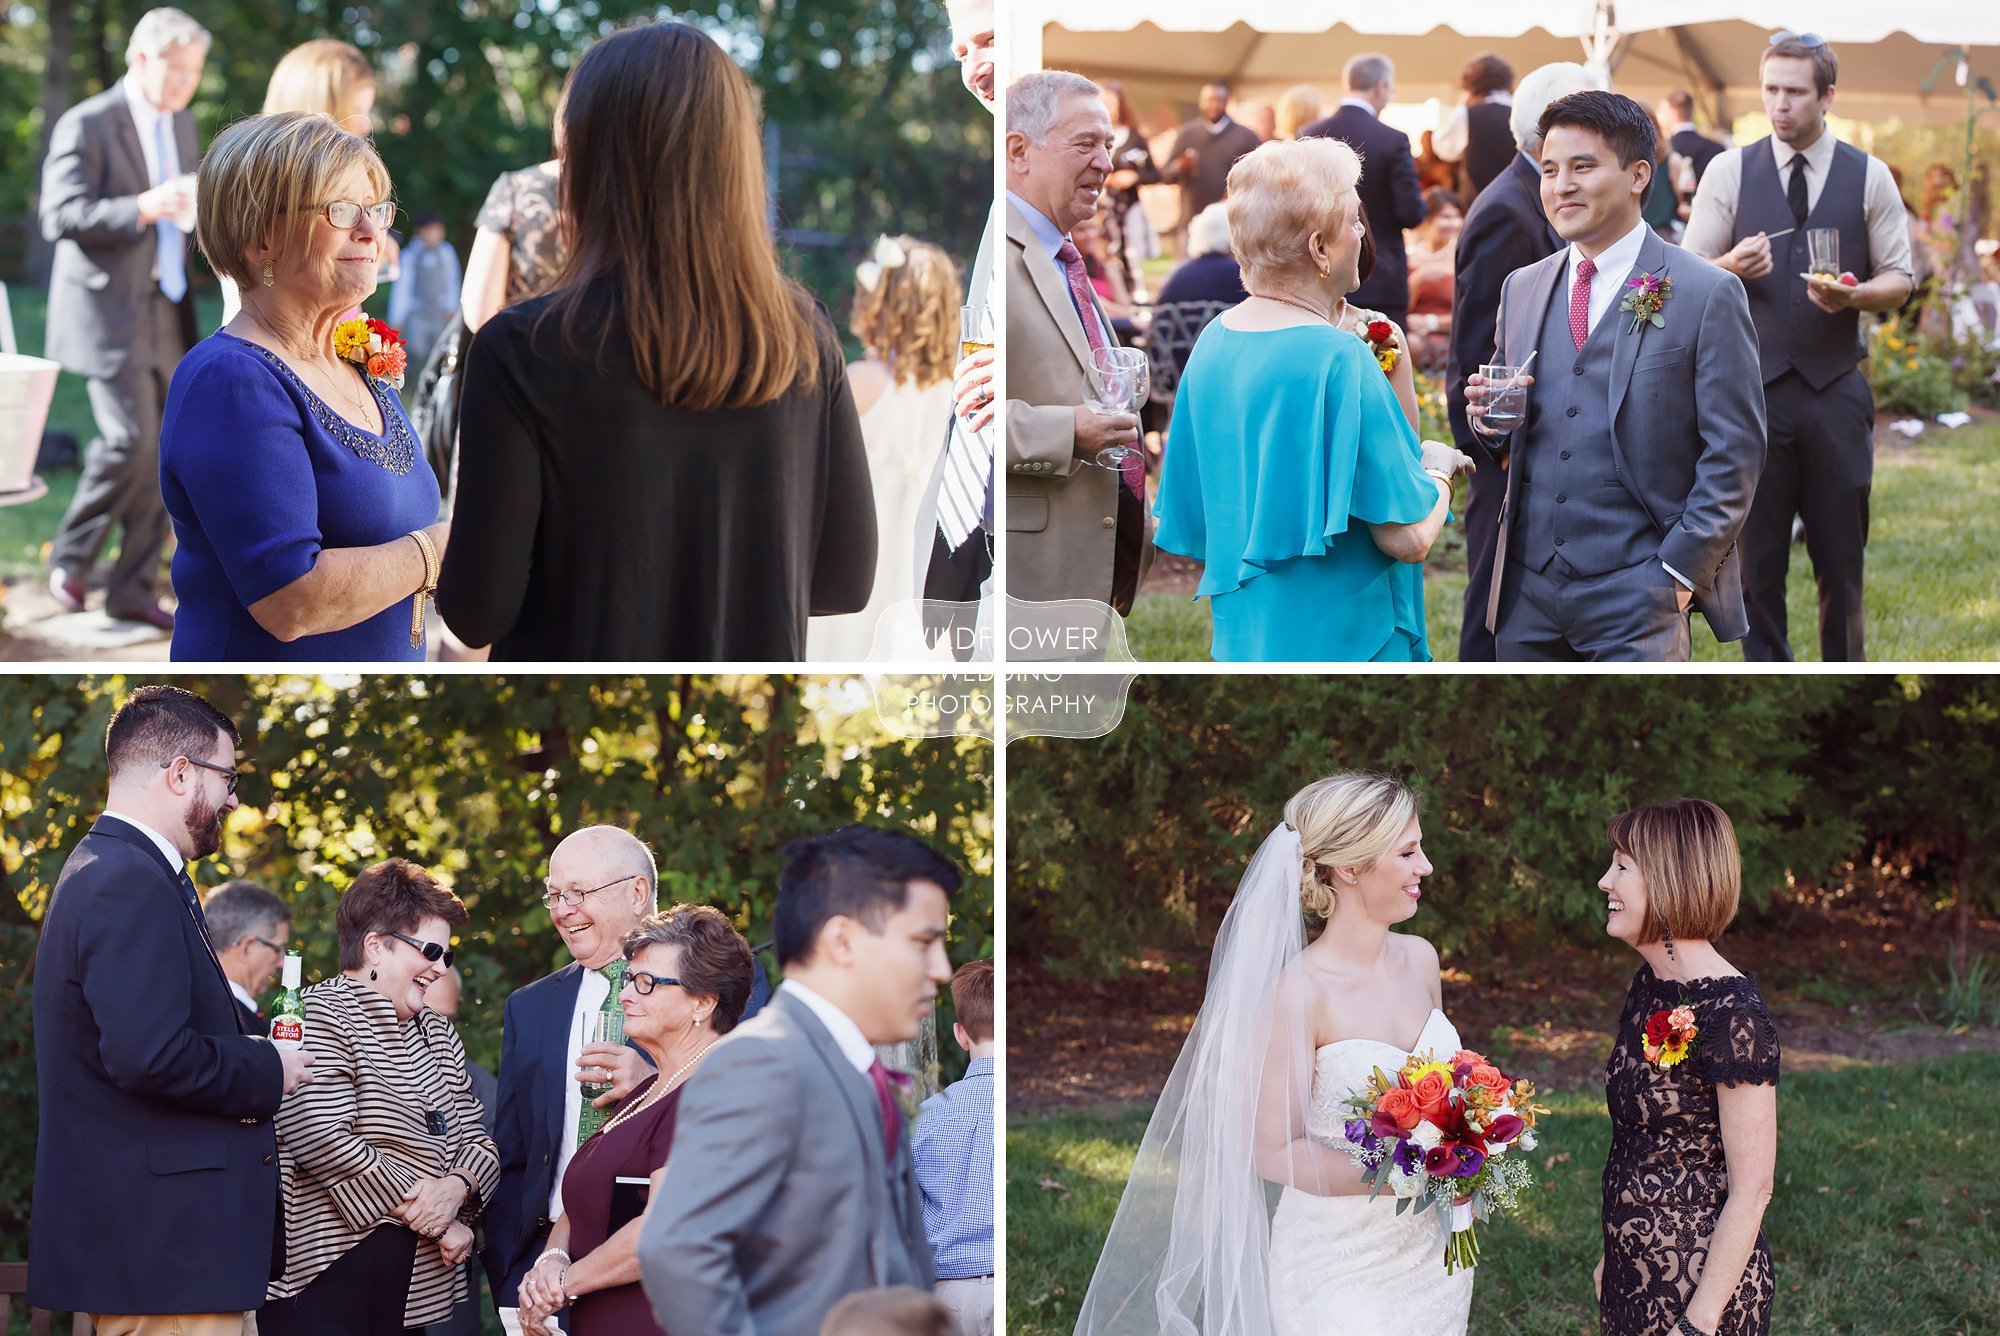 Candid photos of wedding guests enjoying this backyard reception in October in St. Louis.